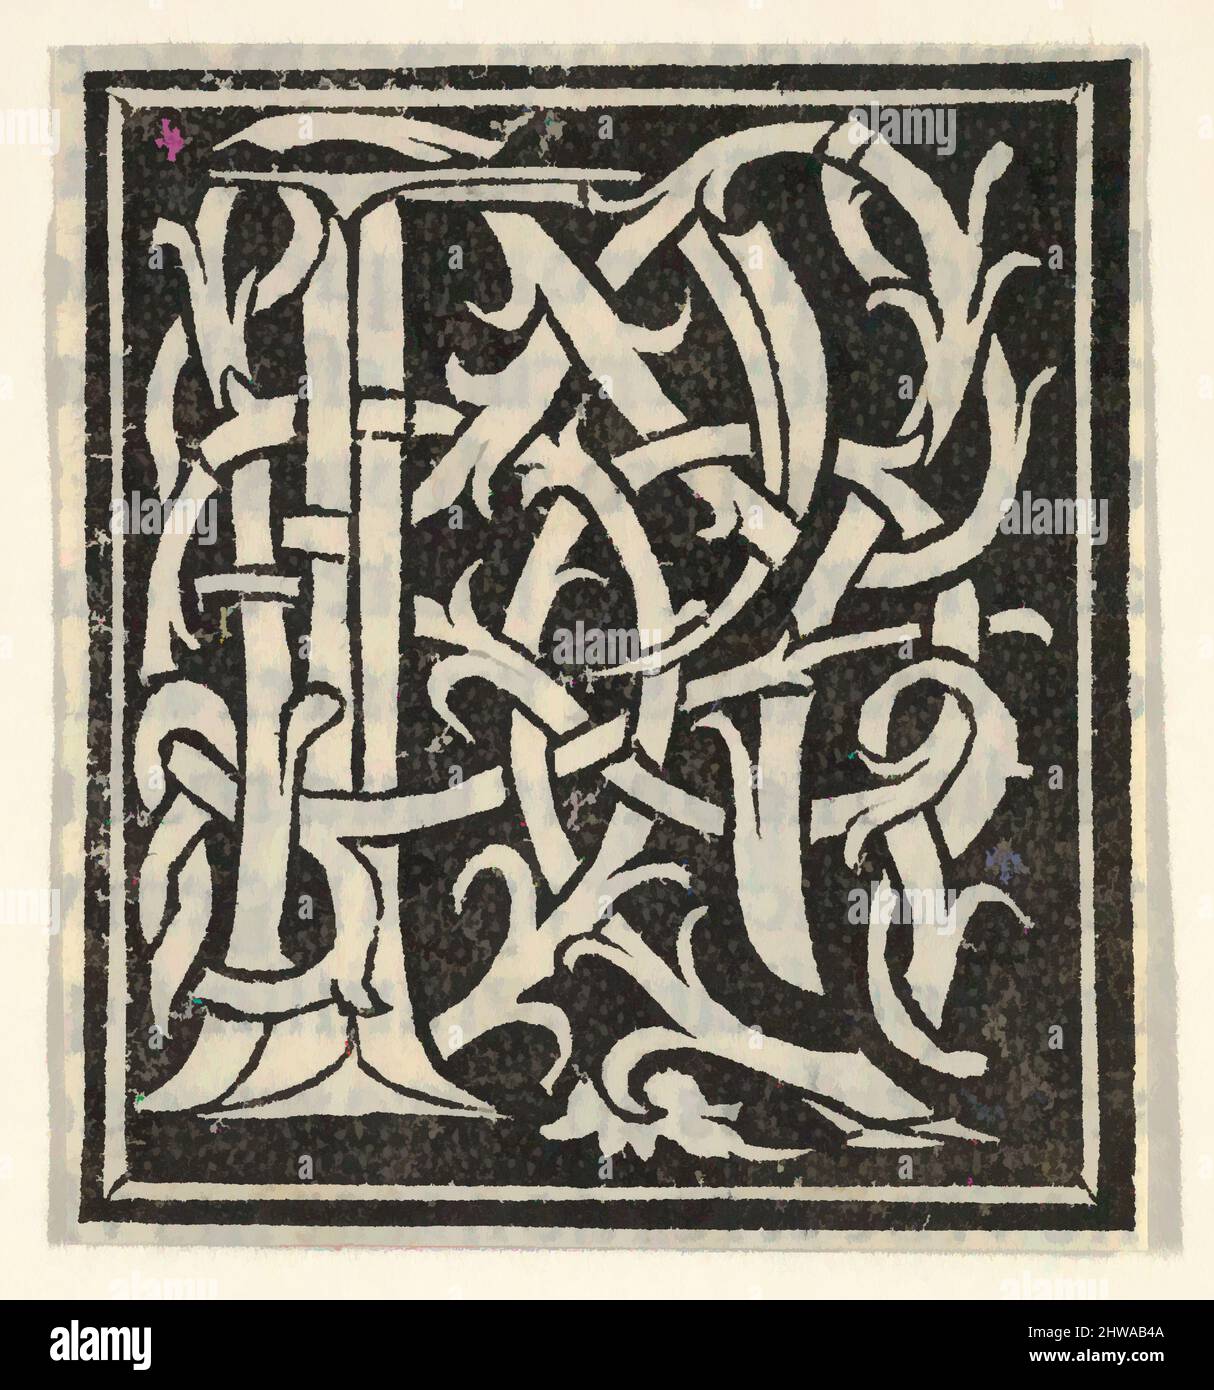 Art inspired by Drawings and Prints, Print, Initial letter P on patterned background, Artist, Anonymous, Italian, 16th century, Anonymous, Italy, Classic works modernized by Artotop with a splash of modernity. Shapes, color and value, eye-catching visual impact on art. Emotions through freedom of artworks in a contemporary way. A timeless message pursuing a wildly creative new direction. Artists turning to the digital medium and creating the Artotop NFT Stock Photo